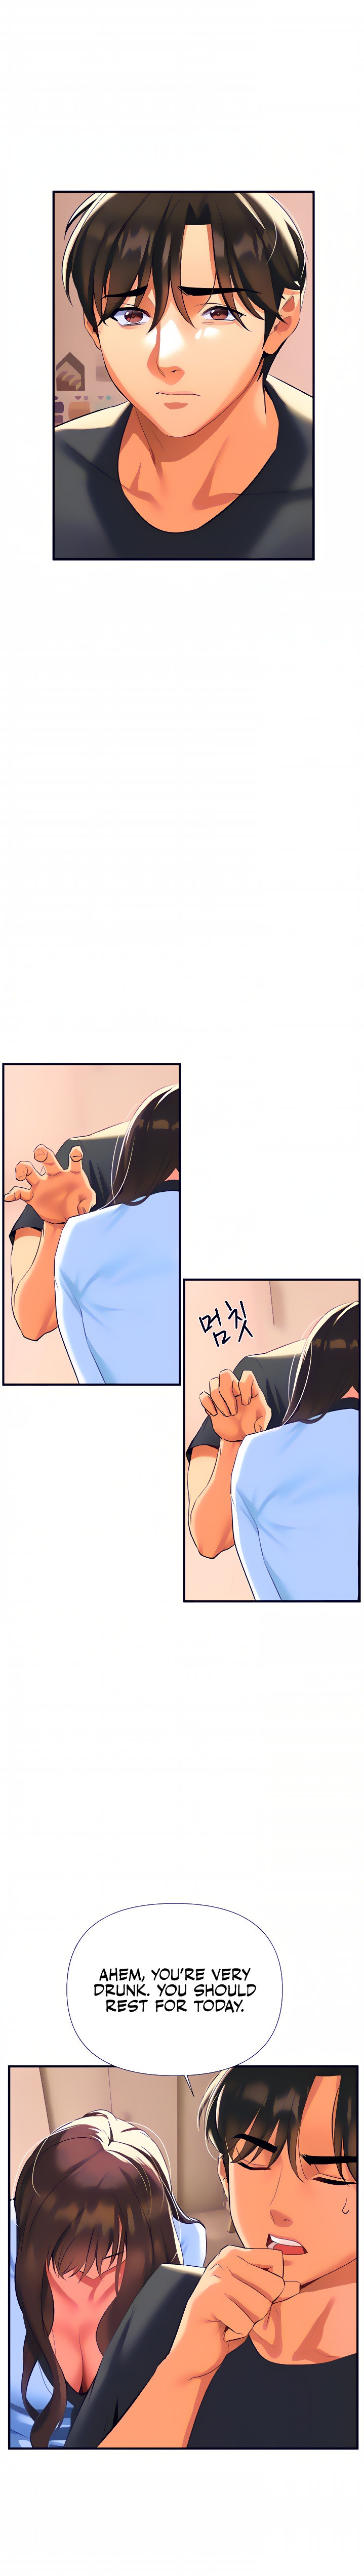 I Need You, Noona - Chapter 7 Page 5